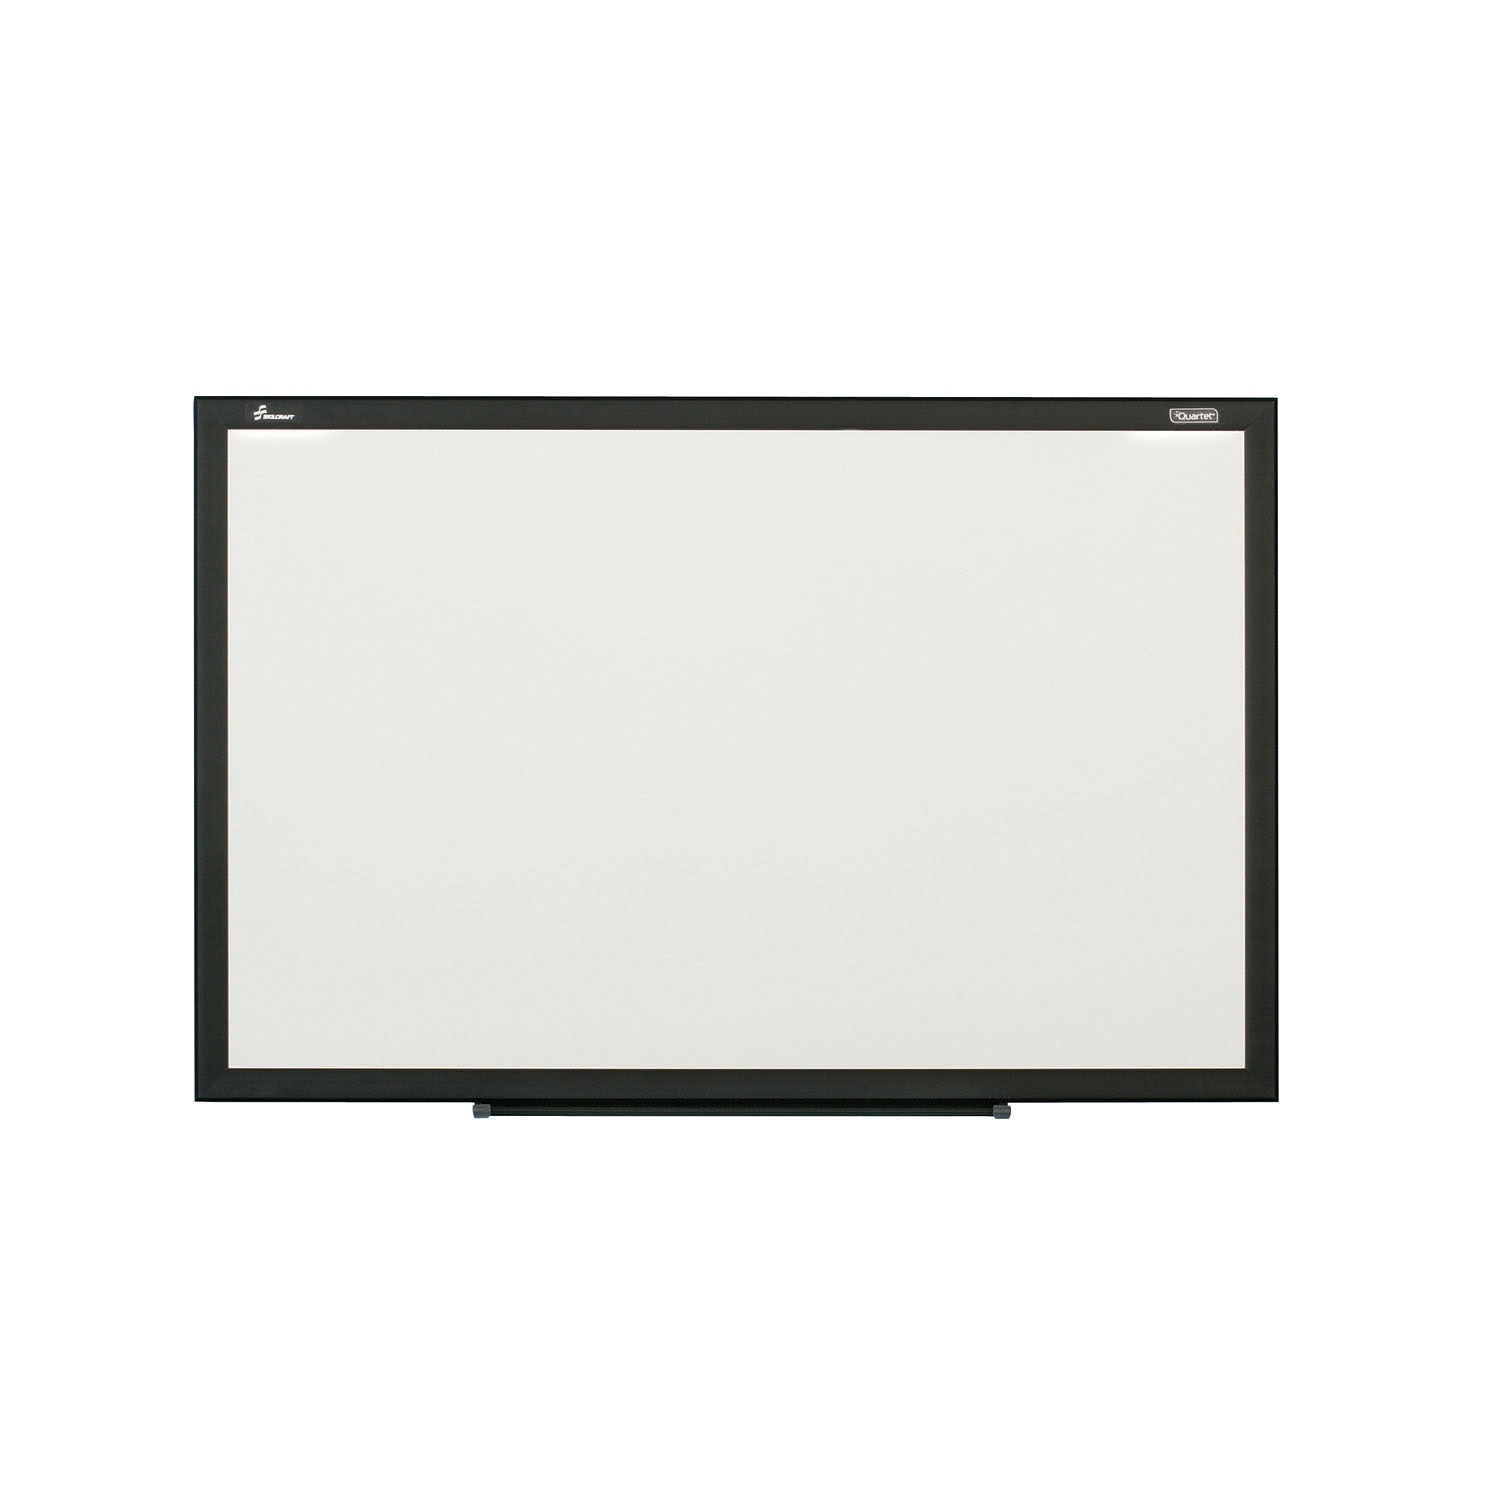 Dry Erase Whiteboard, Magnetic Painted Steel Surface, Black Aluminum Frame, 4 x 3